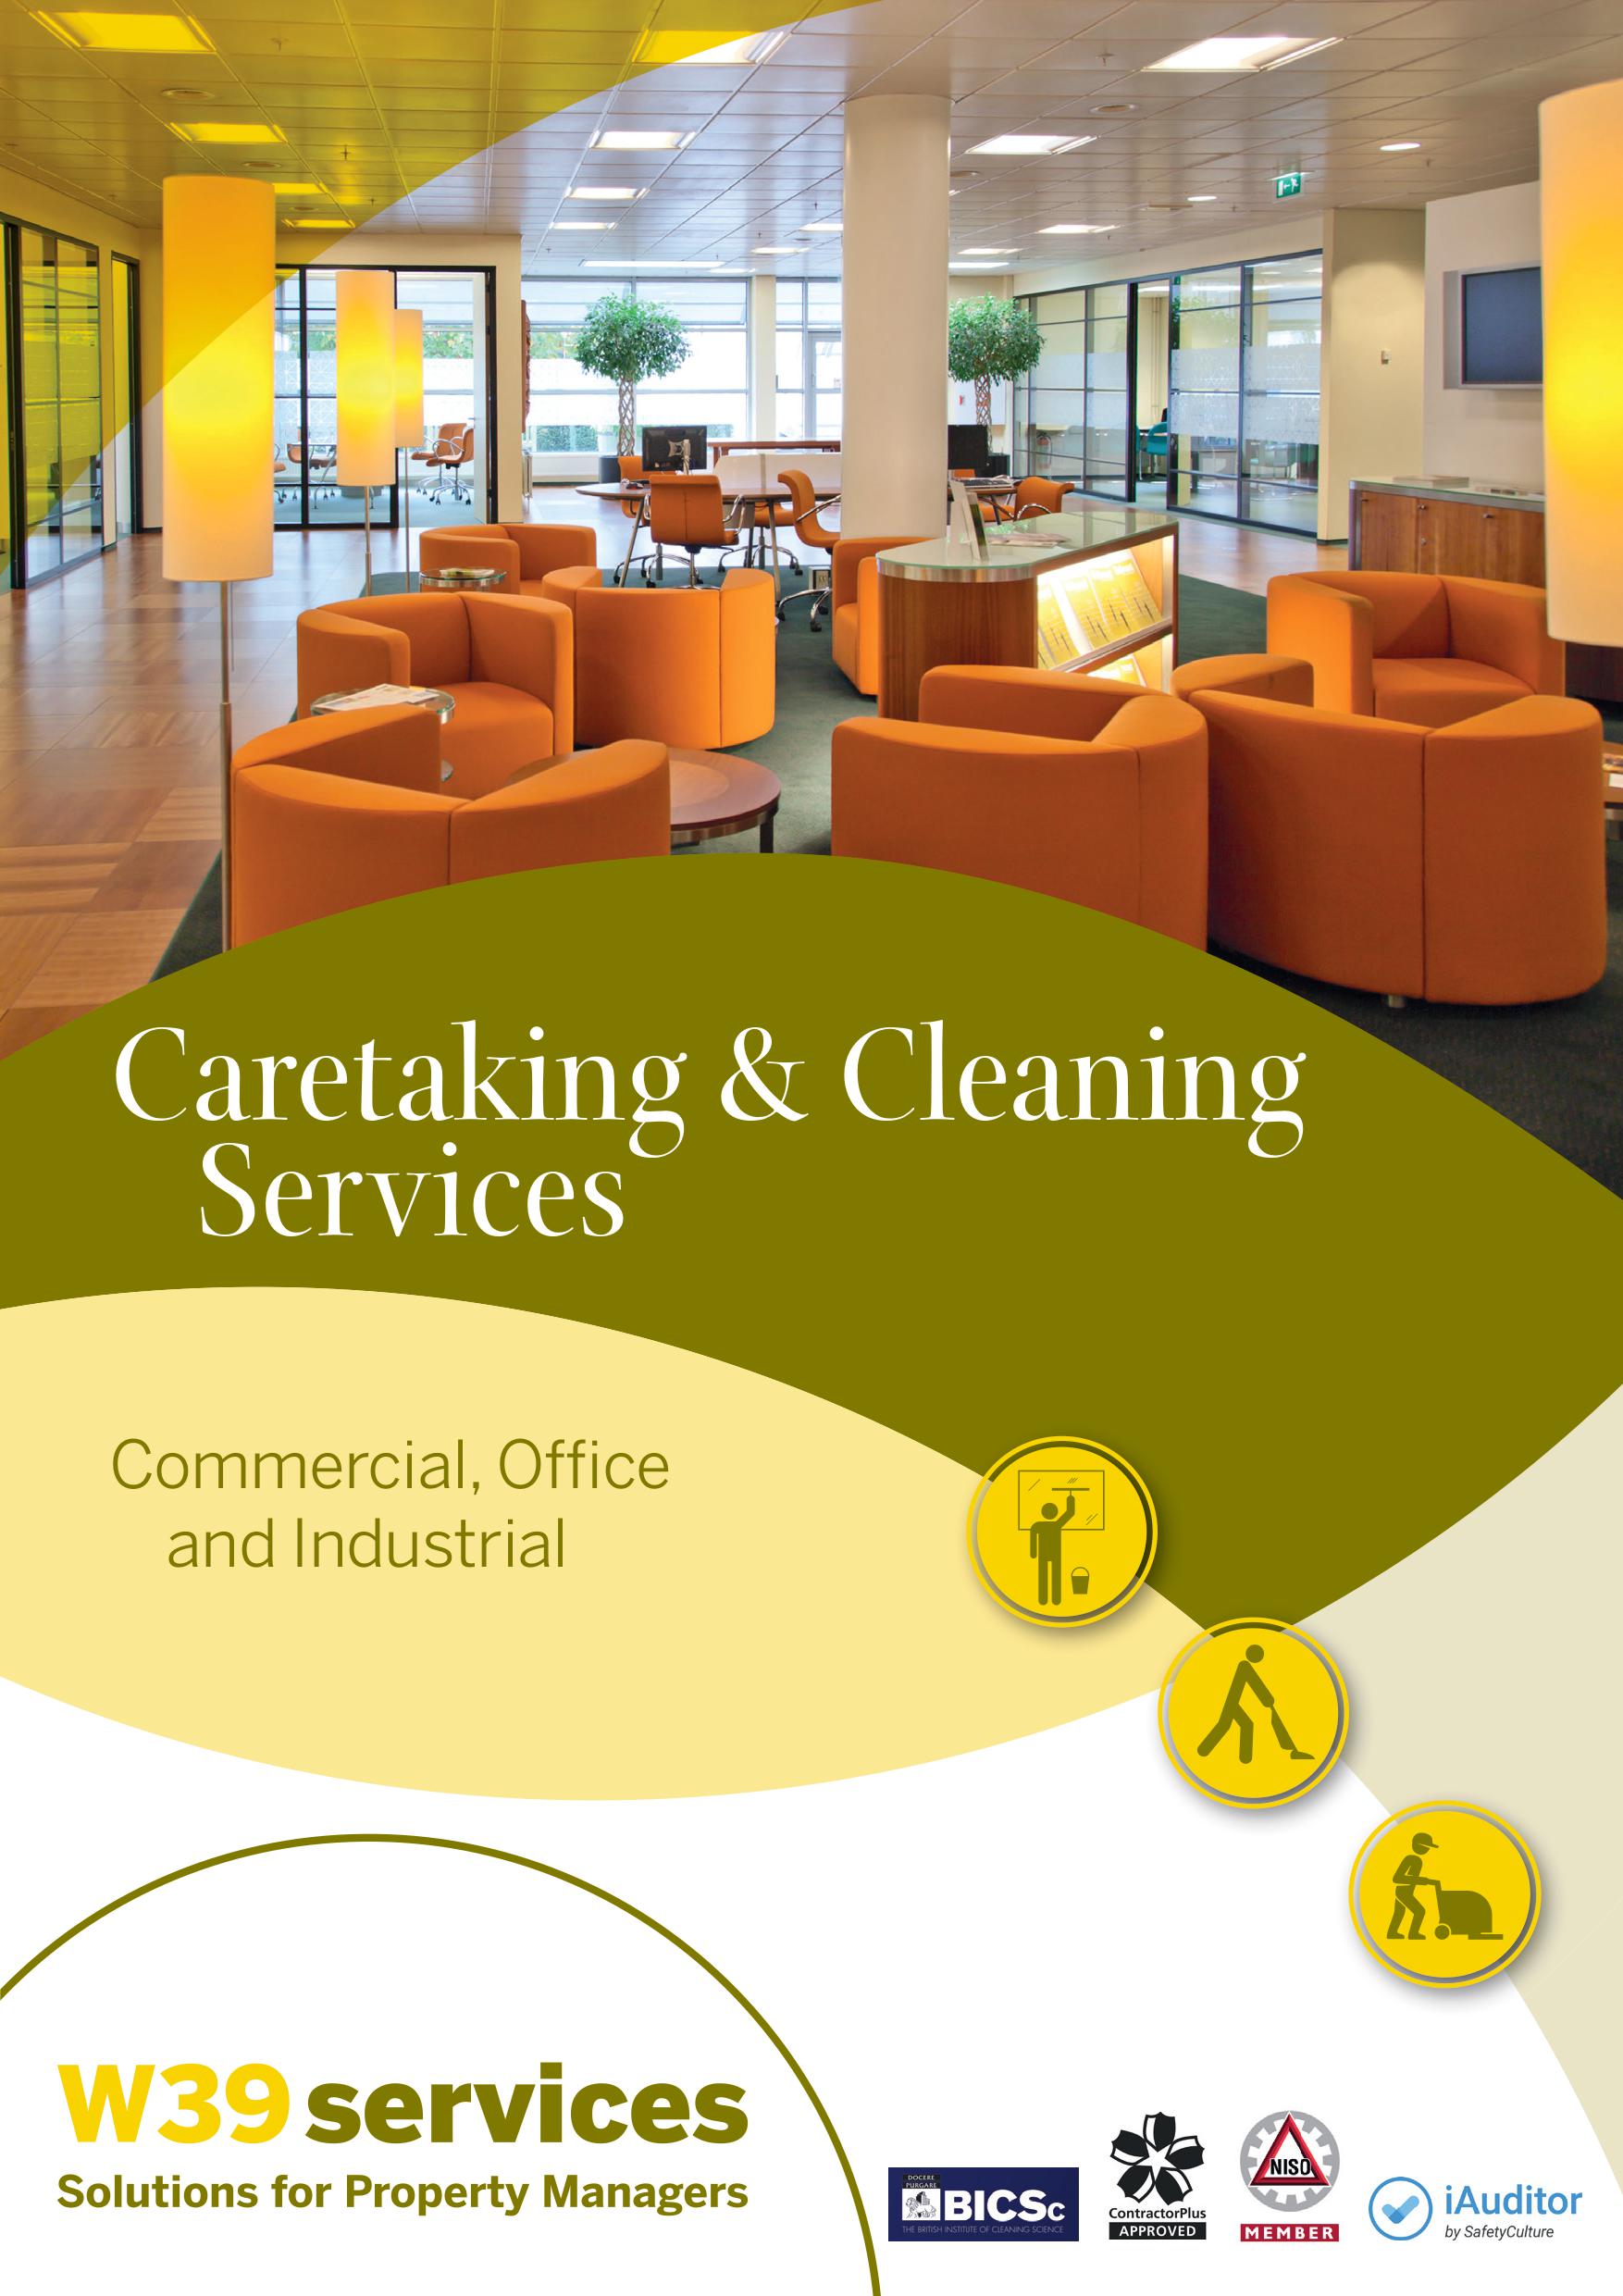 Caretaking and Cleaning Services